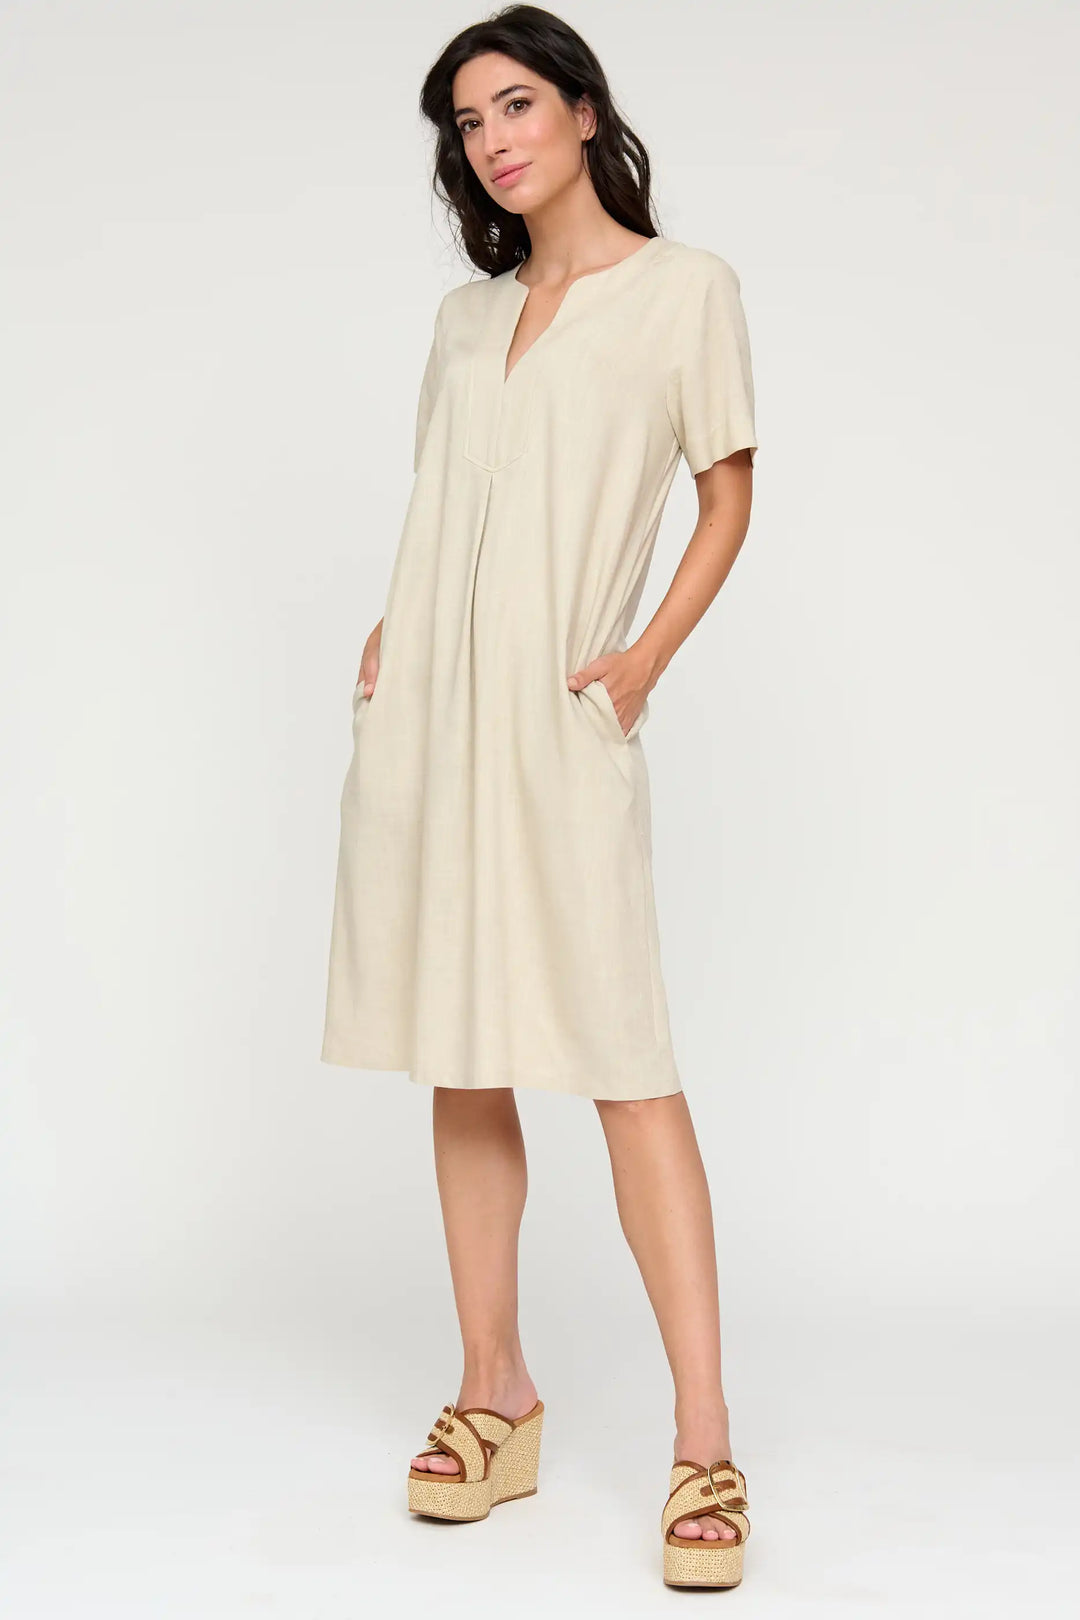 Model in the 'Nieves' style midi dress in a soft neutral tone, with a V-neck, short sleeves, and relaxed fit, paired with textured wedge sandals.